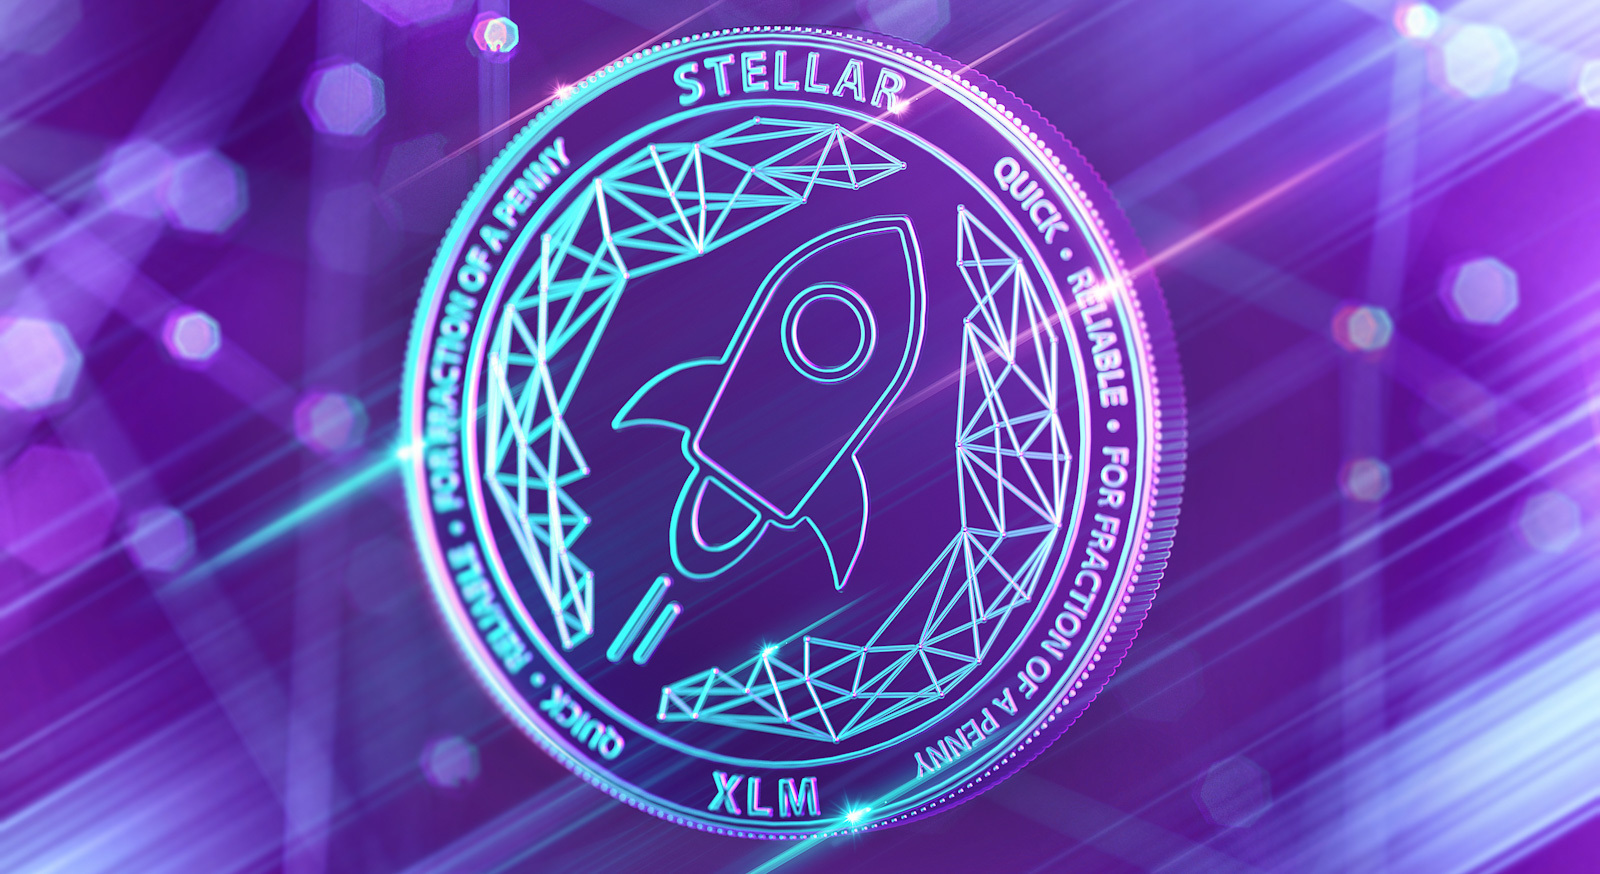 The stellar lumens logo features a rocket ship on a transparent coin against a purple background